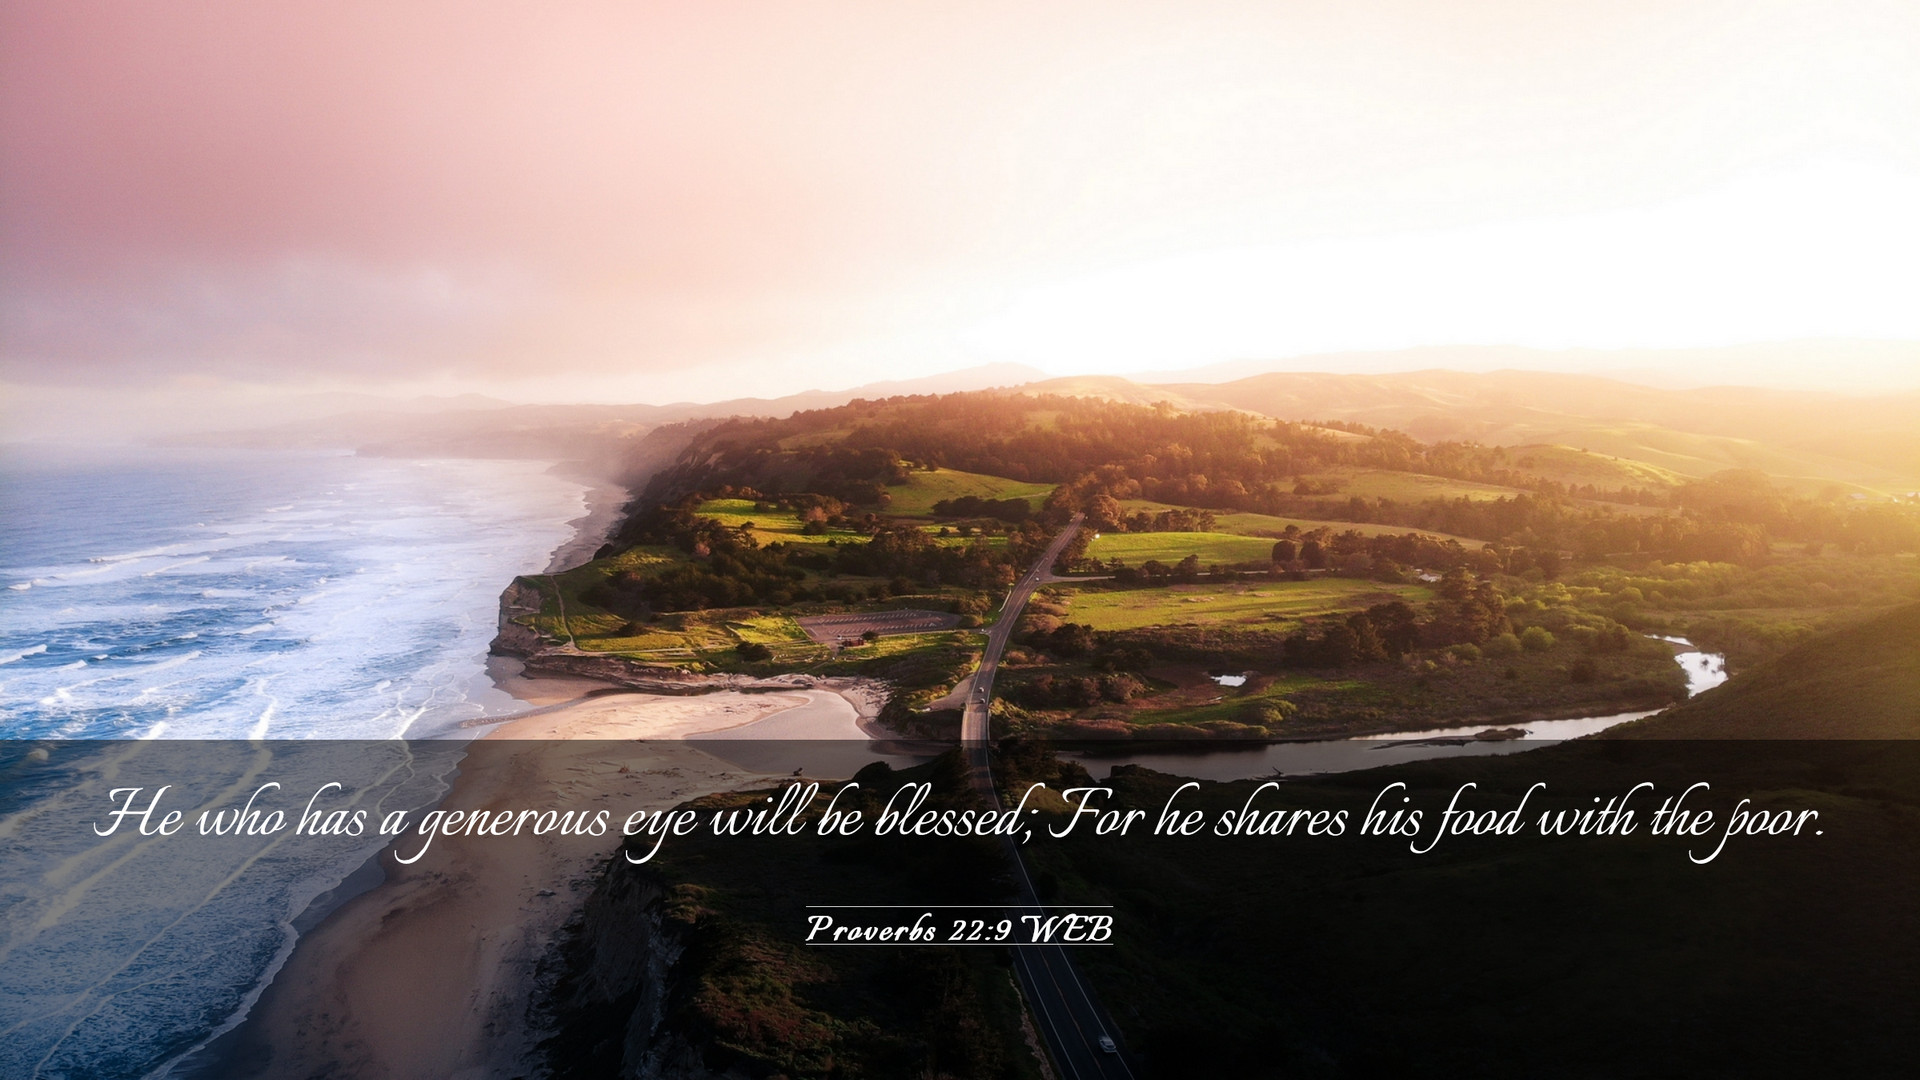 Proverbs 22:9 WEB Desktop Wallpaper who has a generous eye will be blessed; For he